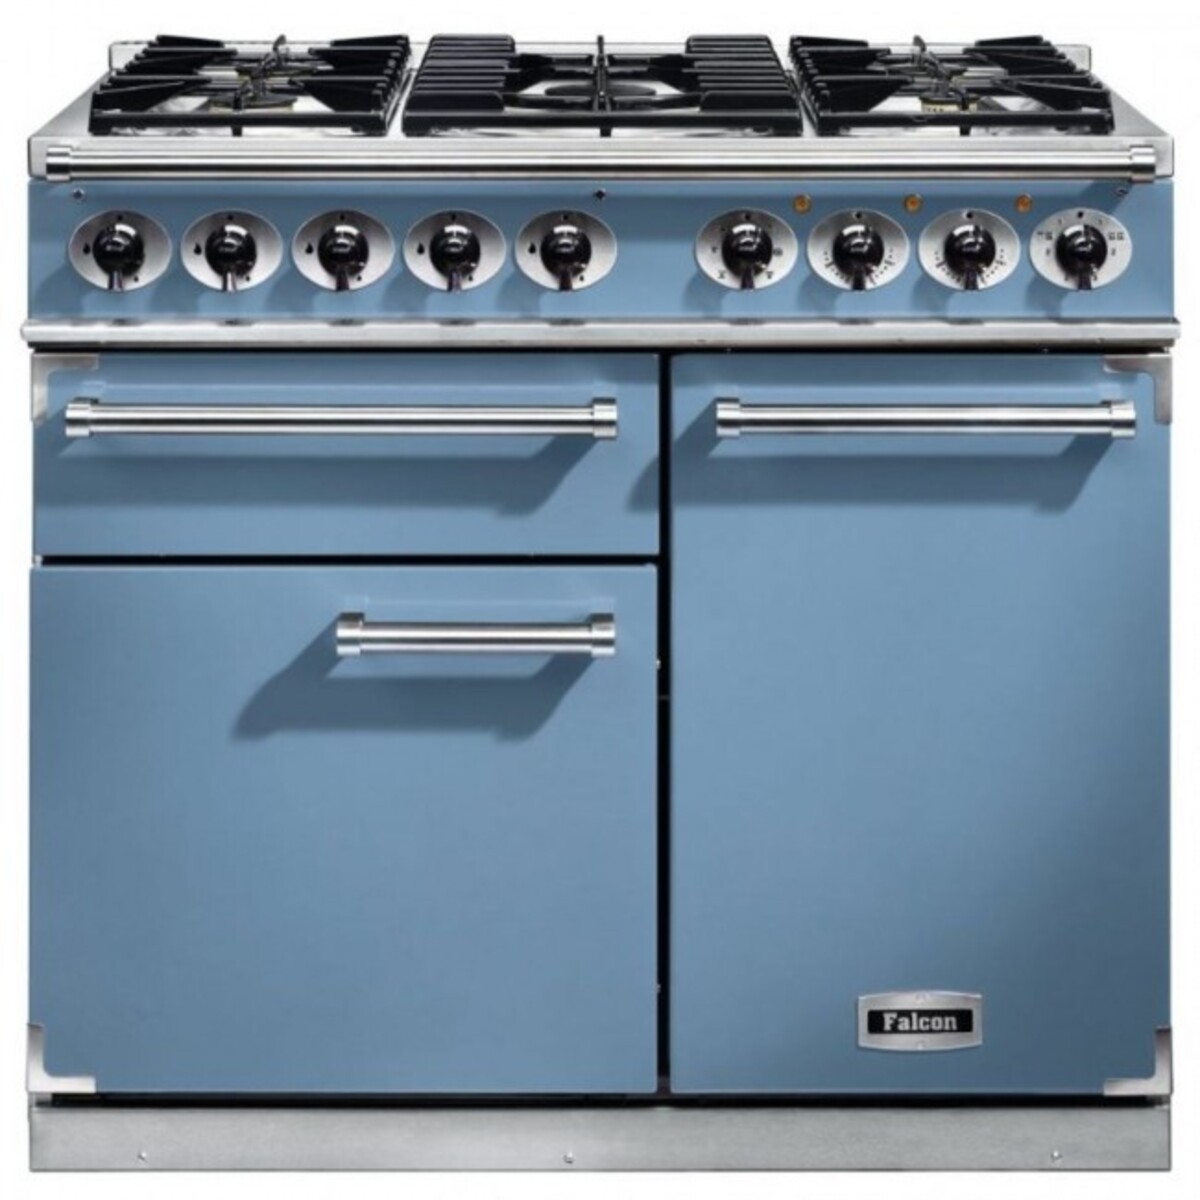 FALCON F1000DXDFCANM 98620 100cm Deluxe Range Cooker, China Blue Finish